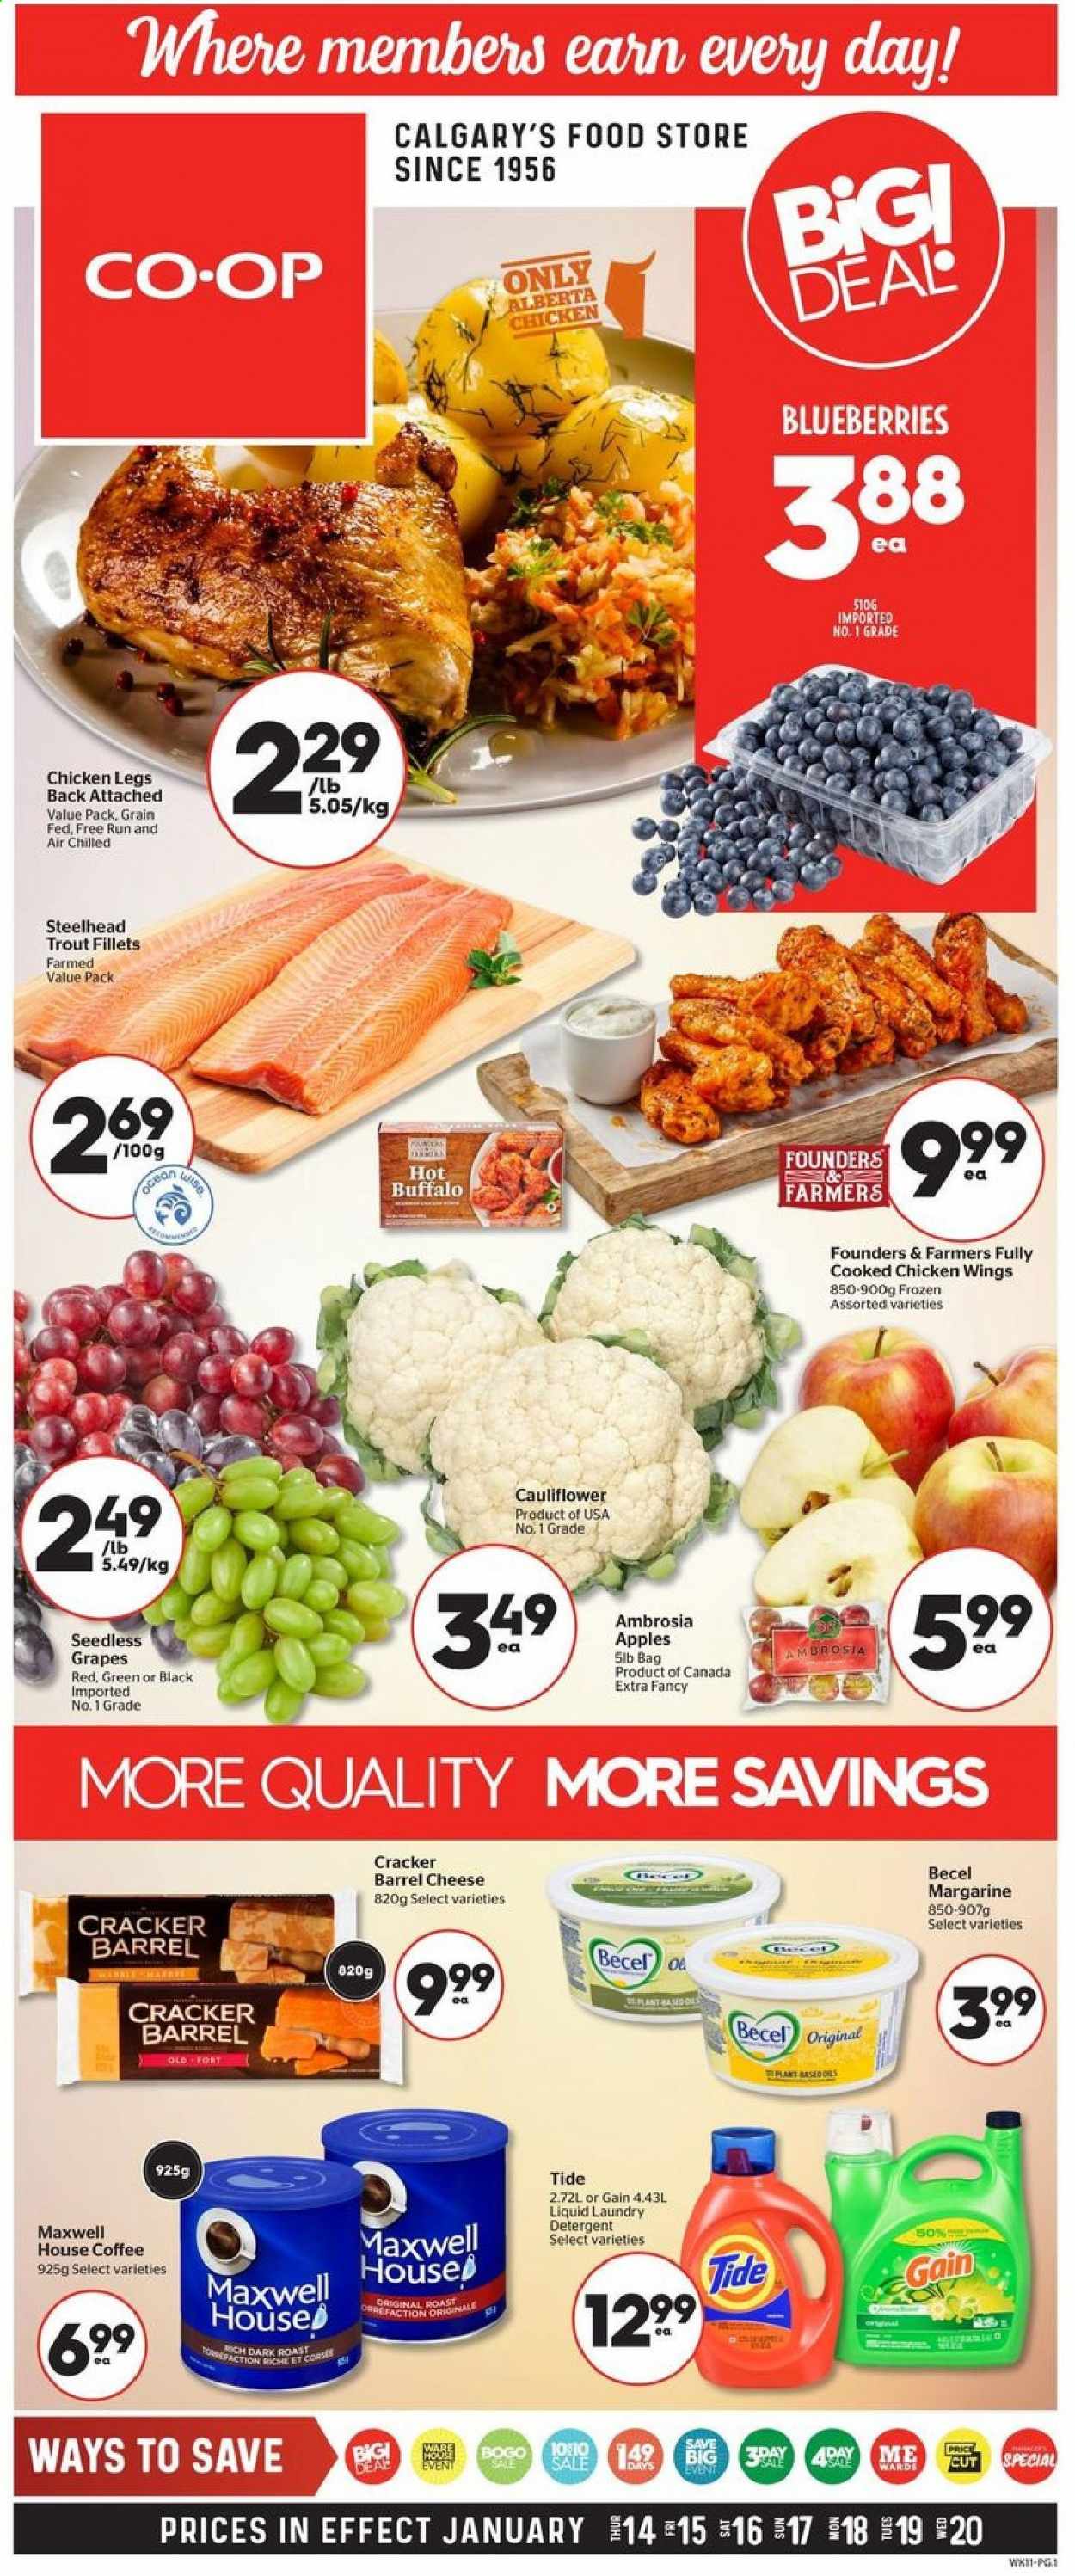 thumbnail - Calgary Co-op Flyer - January 14, 2021 - January 20, 2021 - Sales products - cauliflower, apples, blueberries, grapes, seedless grapes, trout, cheese, margarine, chicken wings, crackers, Maxwell House, coffee, chicken legs, chicken, Gain, Tide, laundry detergent, bag. Page 1.